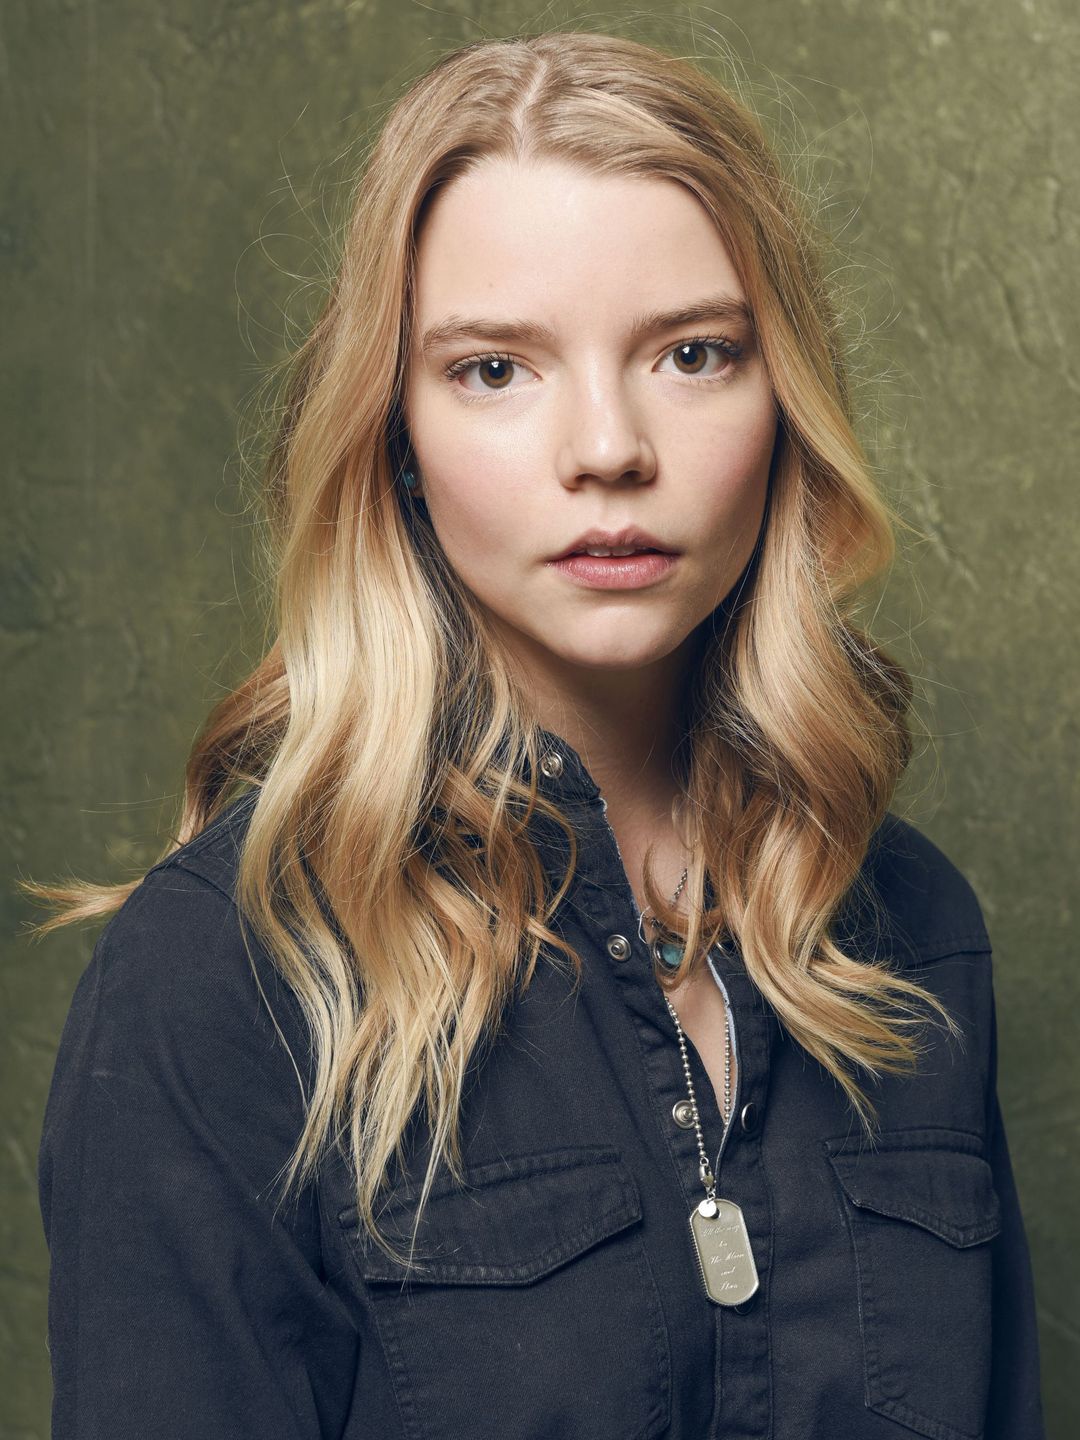 Anya Taylor-Joy who are her parents